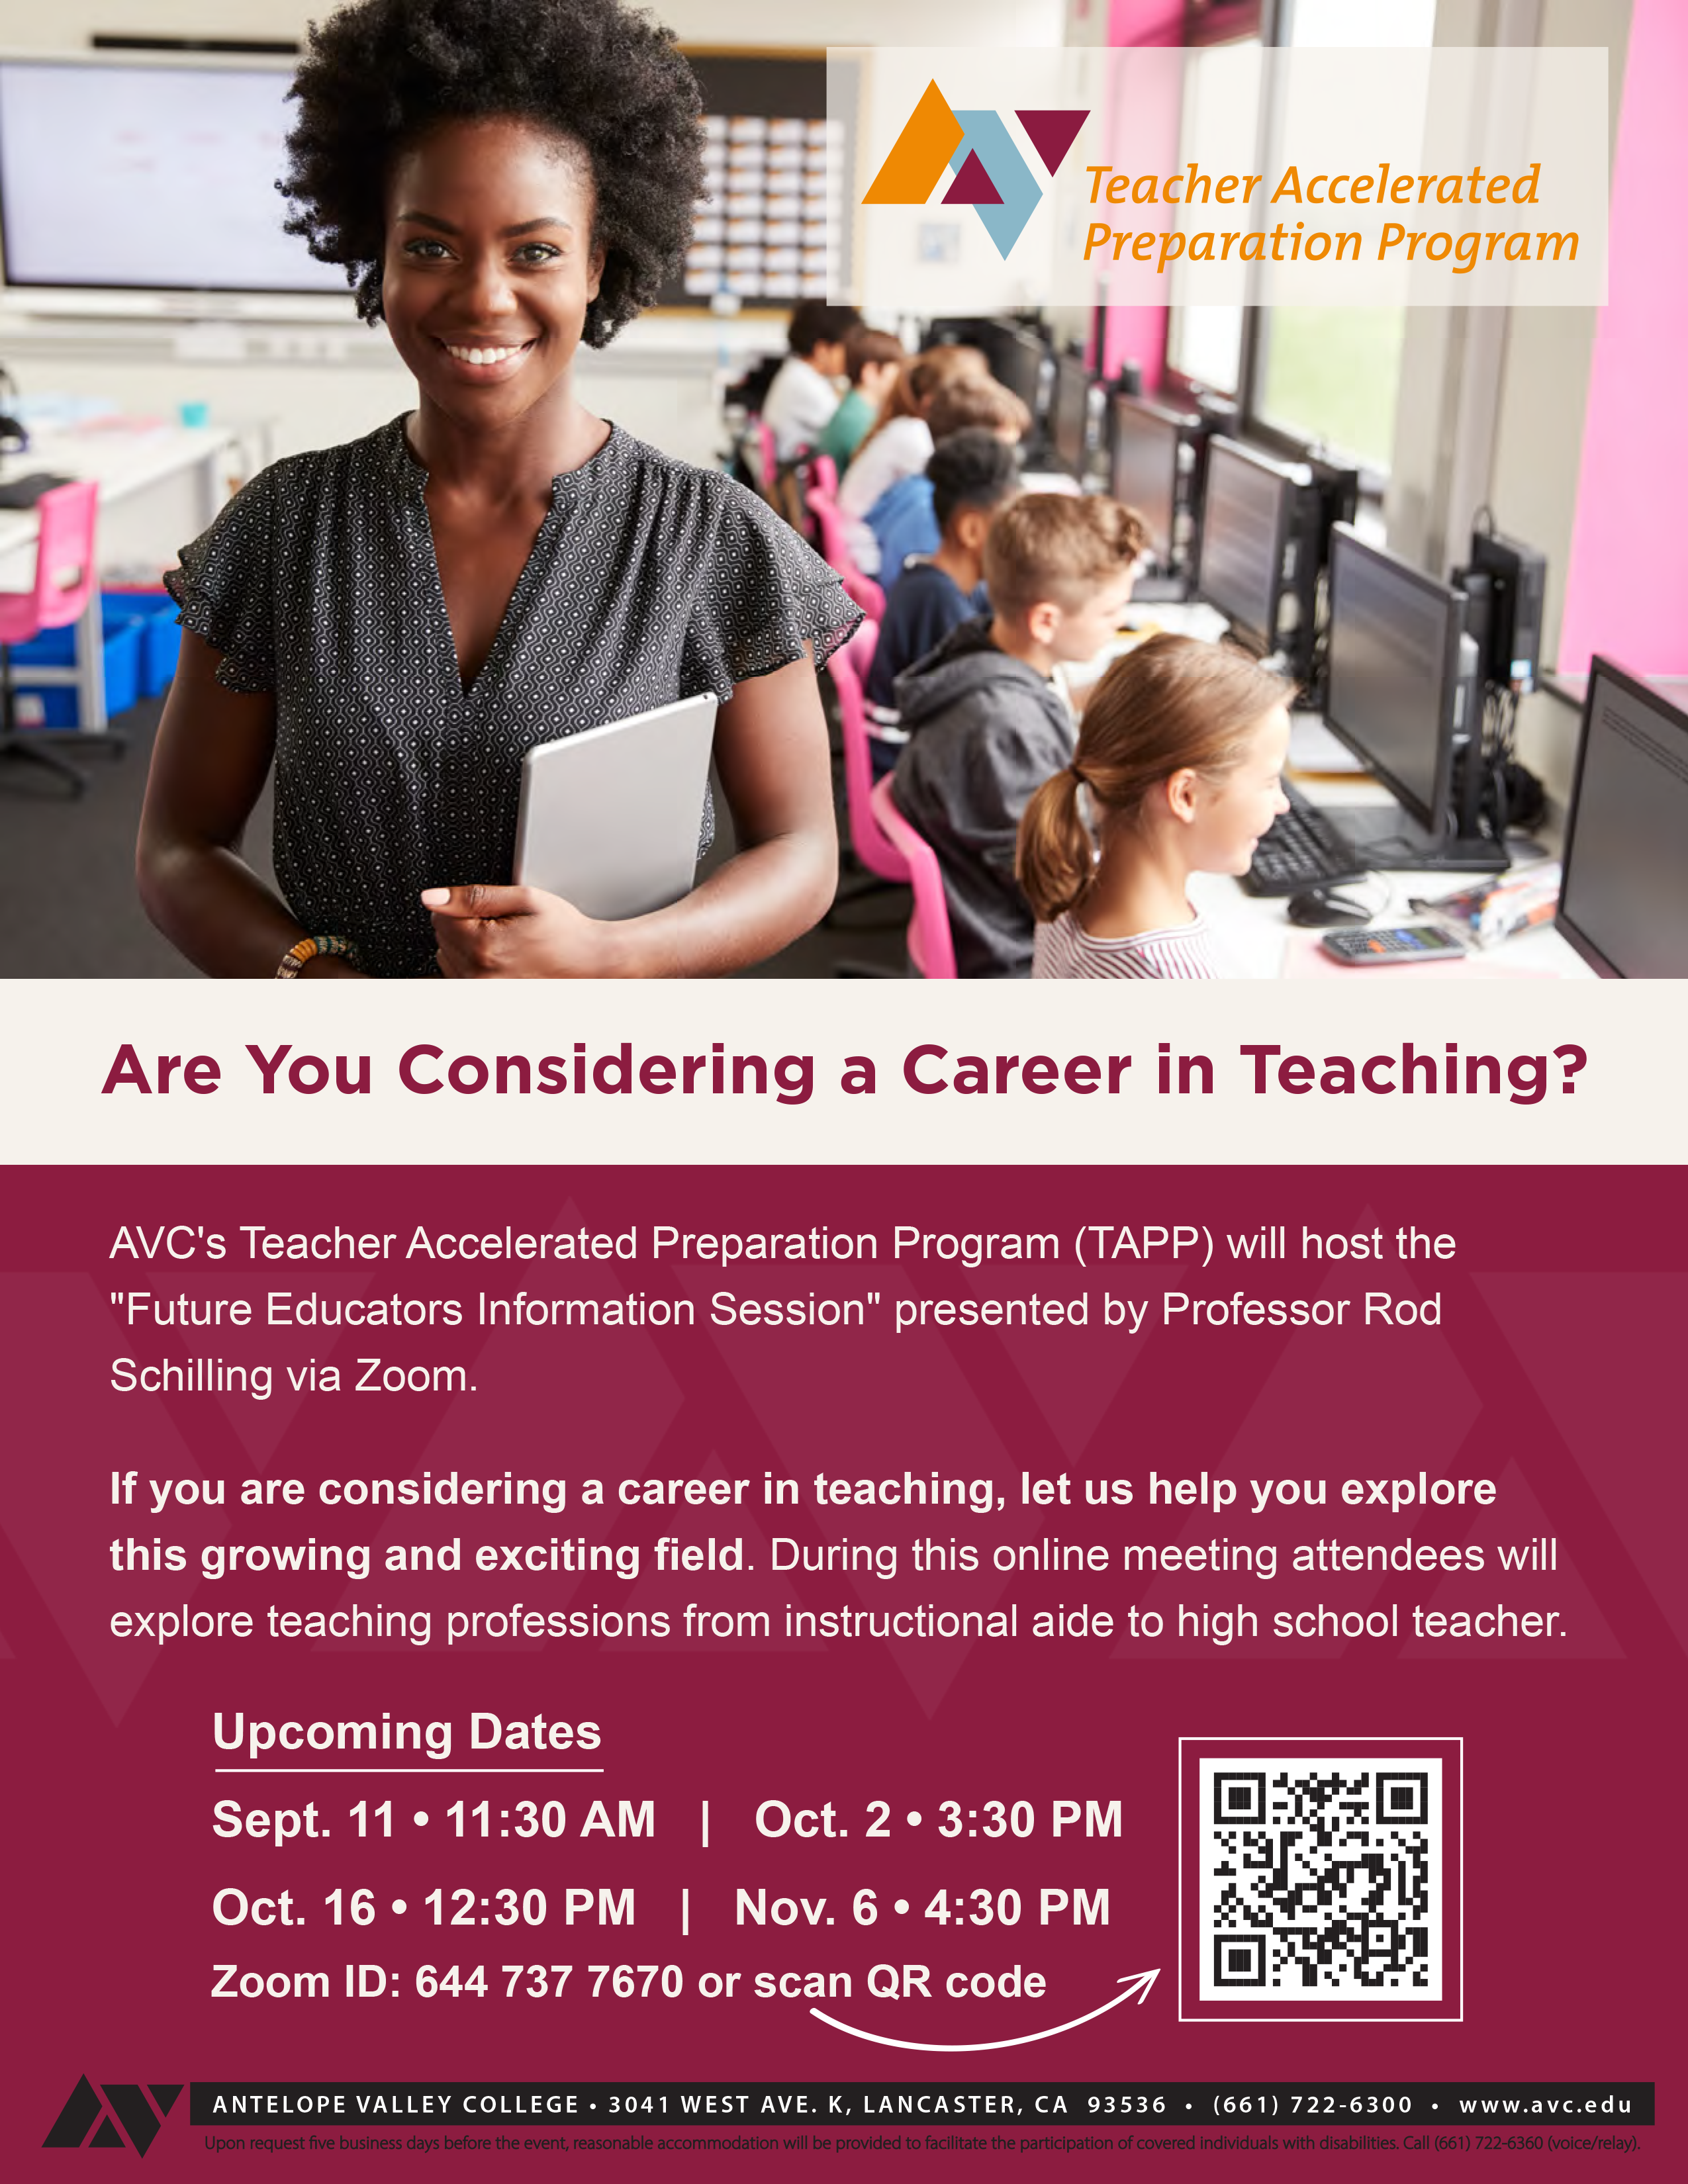 Are you considering a career in teaching. AVC's Teach Accelerated Preparation Program (TAPP) will host the Future Educators Information Session presented by Professor Rod Schilling via Zoom. If you are considering a career in teaching, let us help you explore this growing and exciting field.